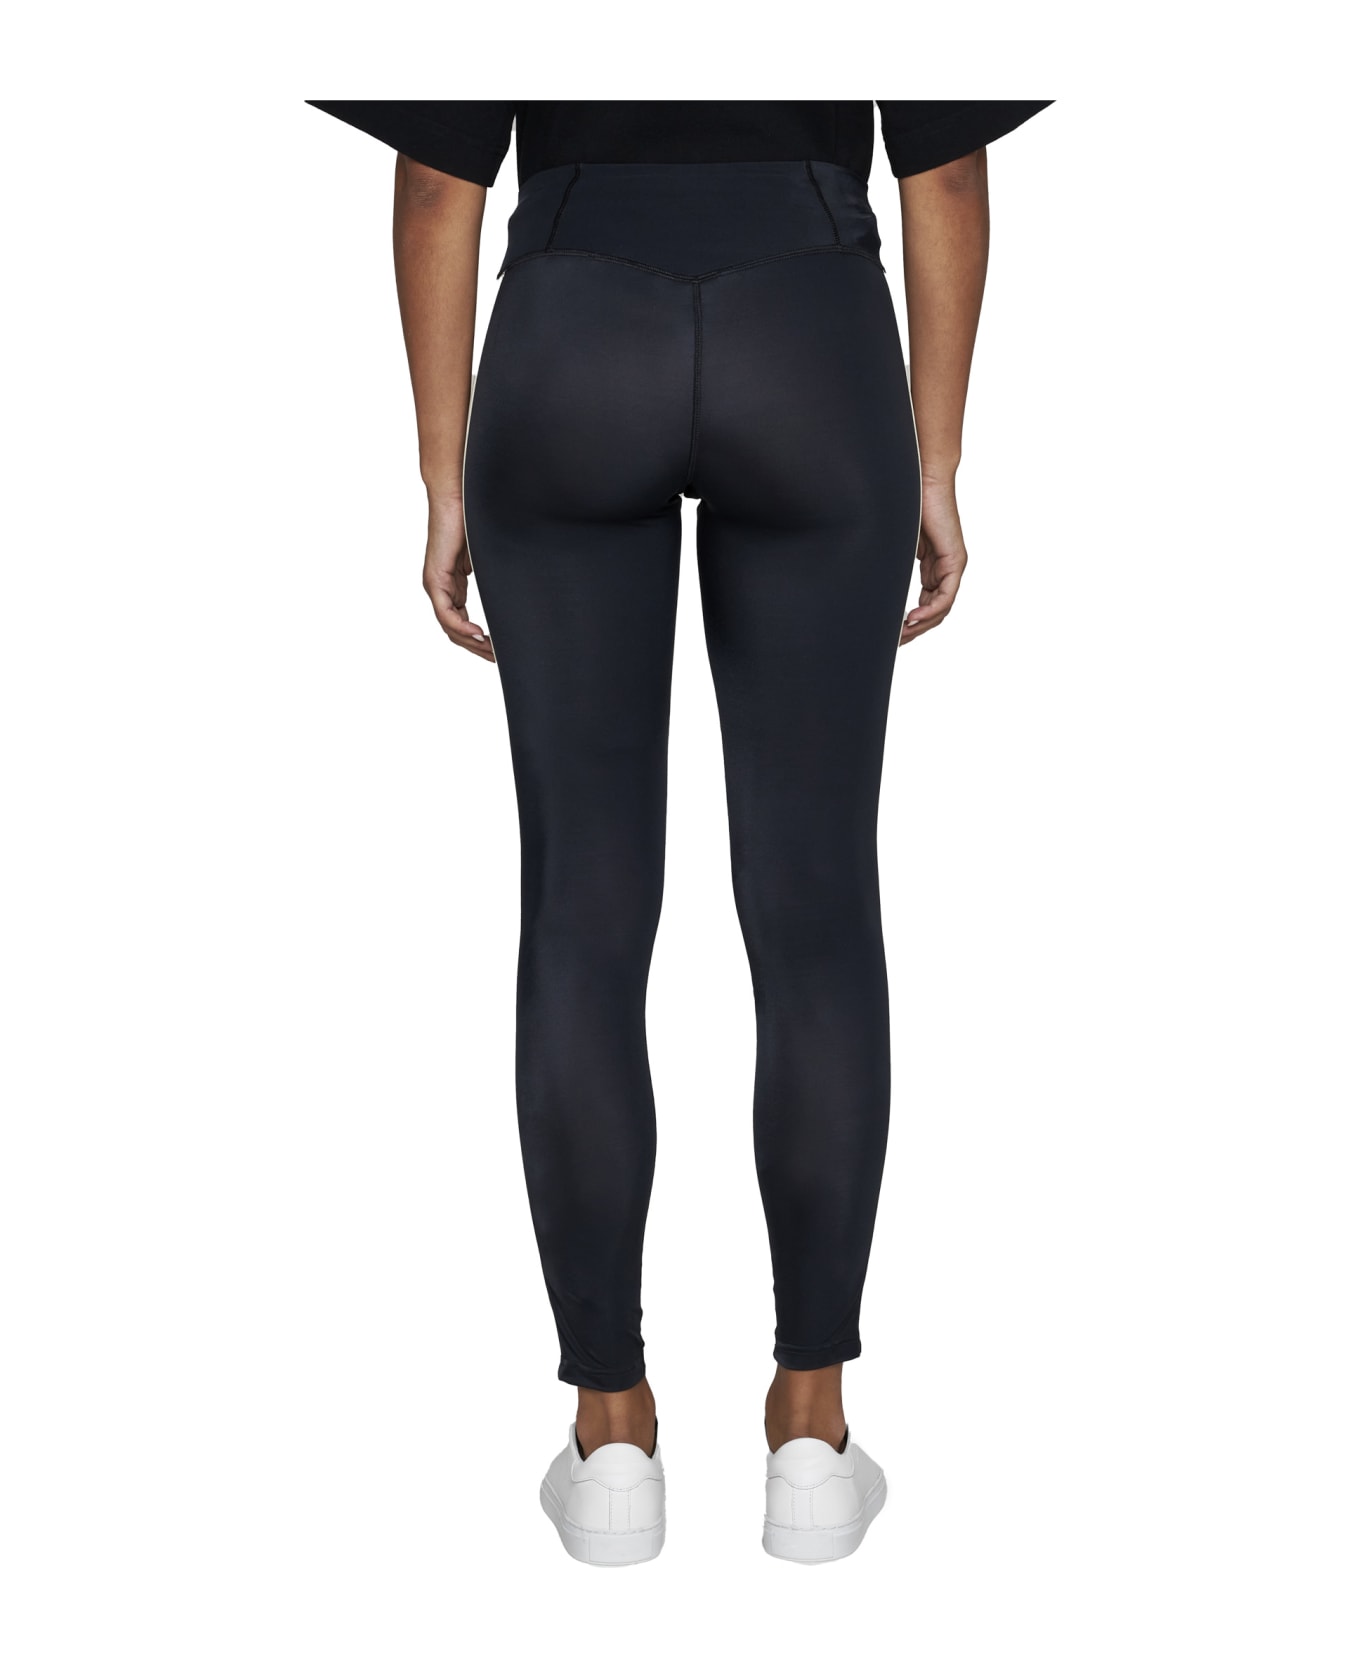 Palm Angels Leggings With Contrasting Side Bands - Black